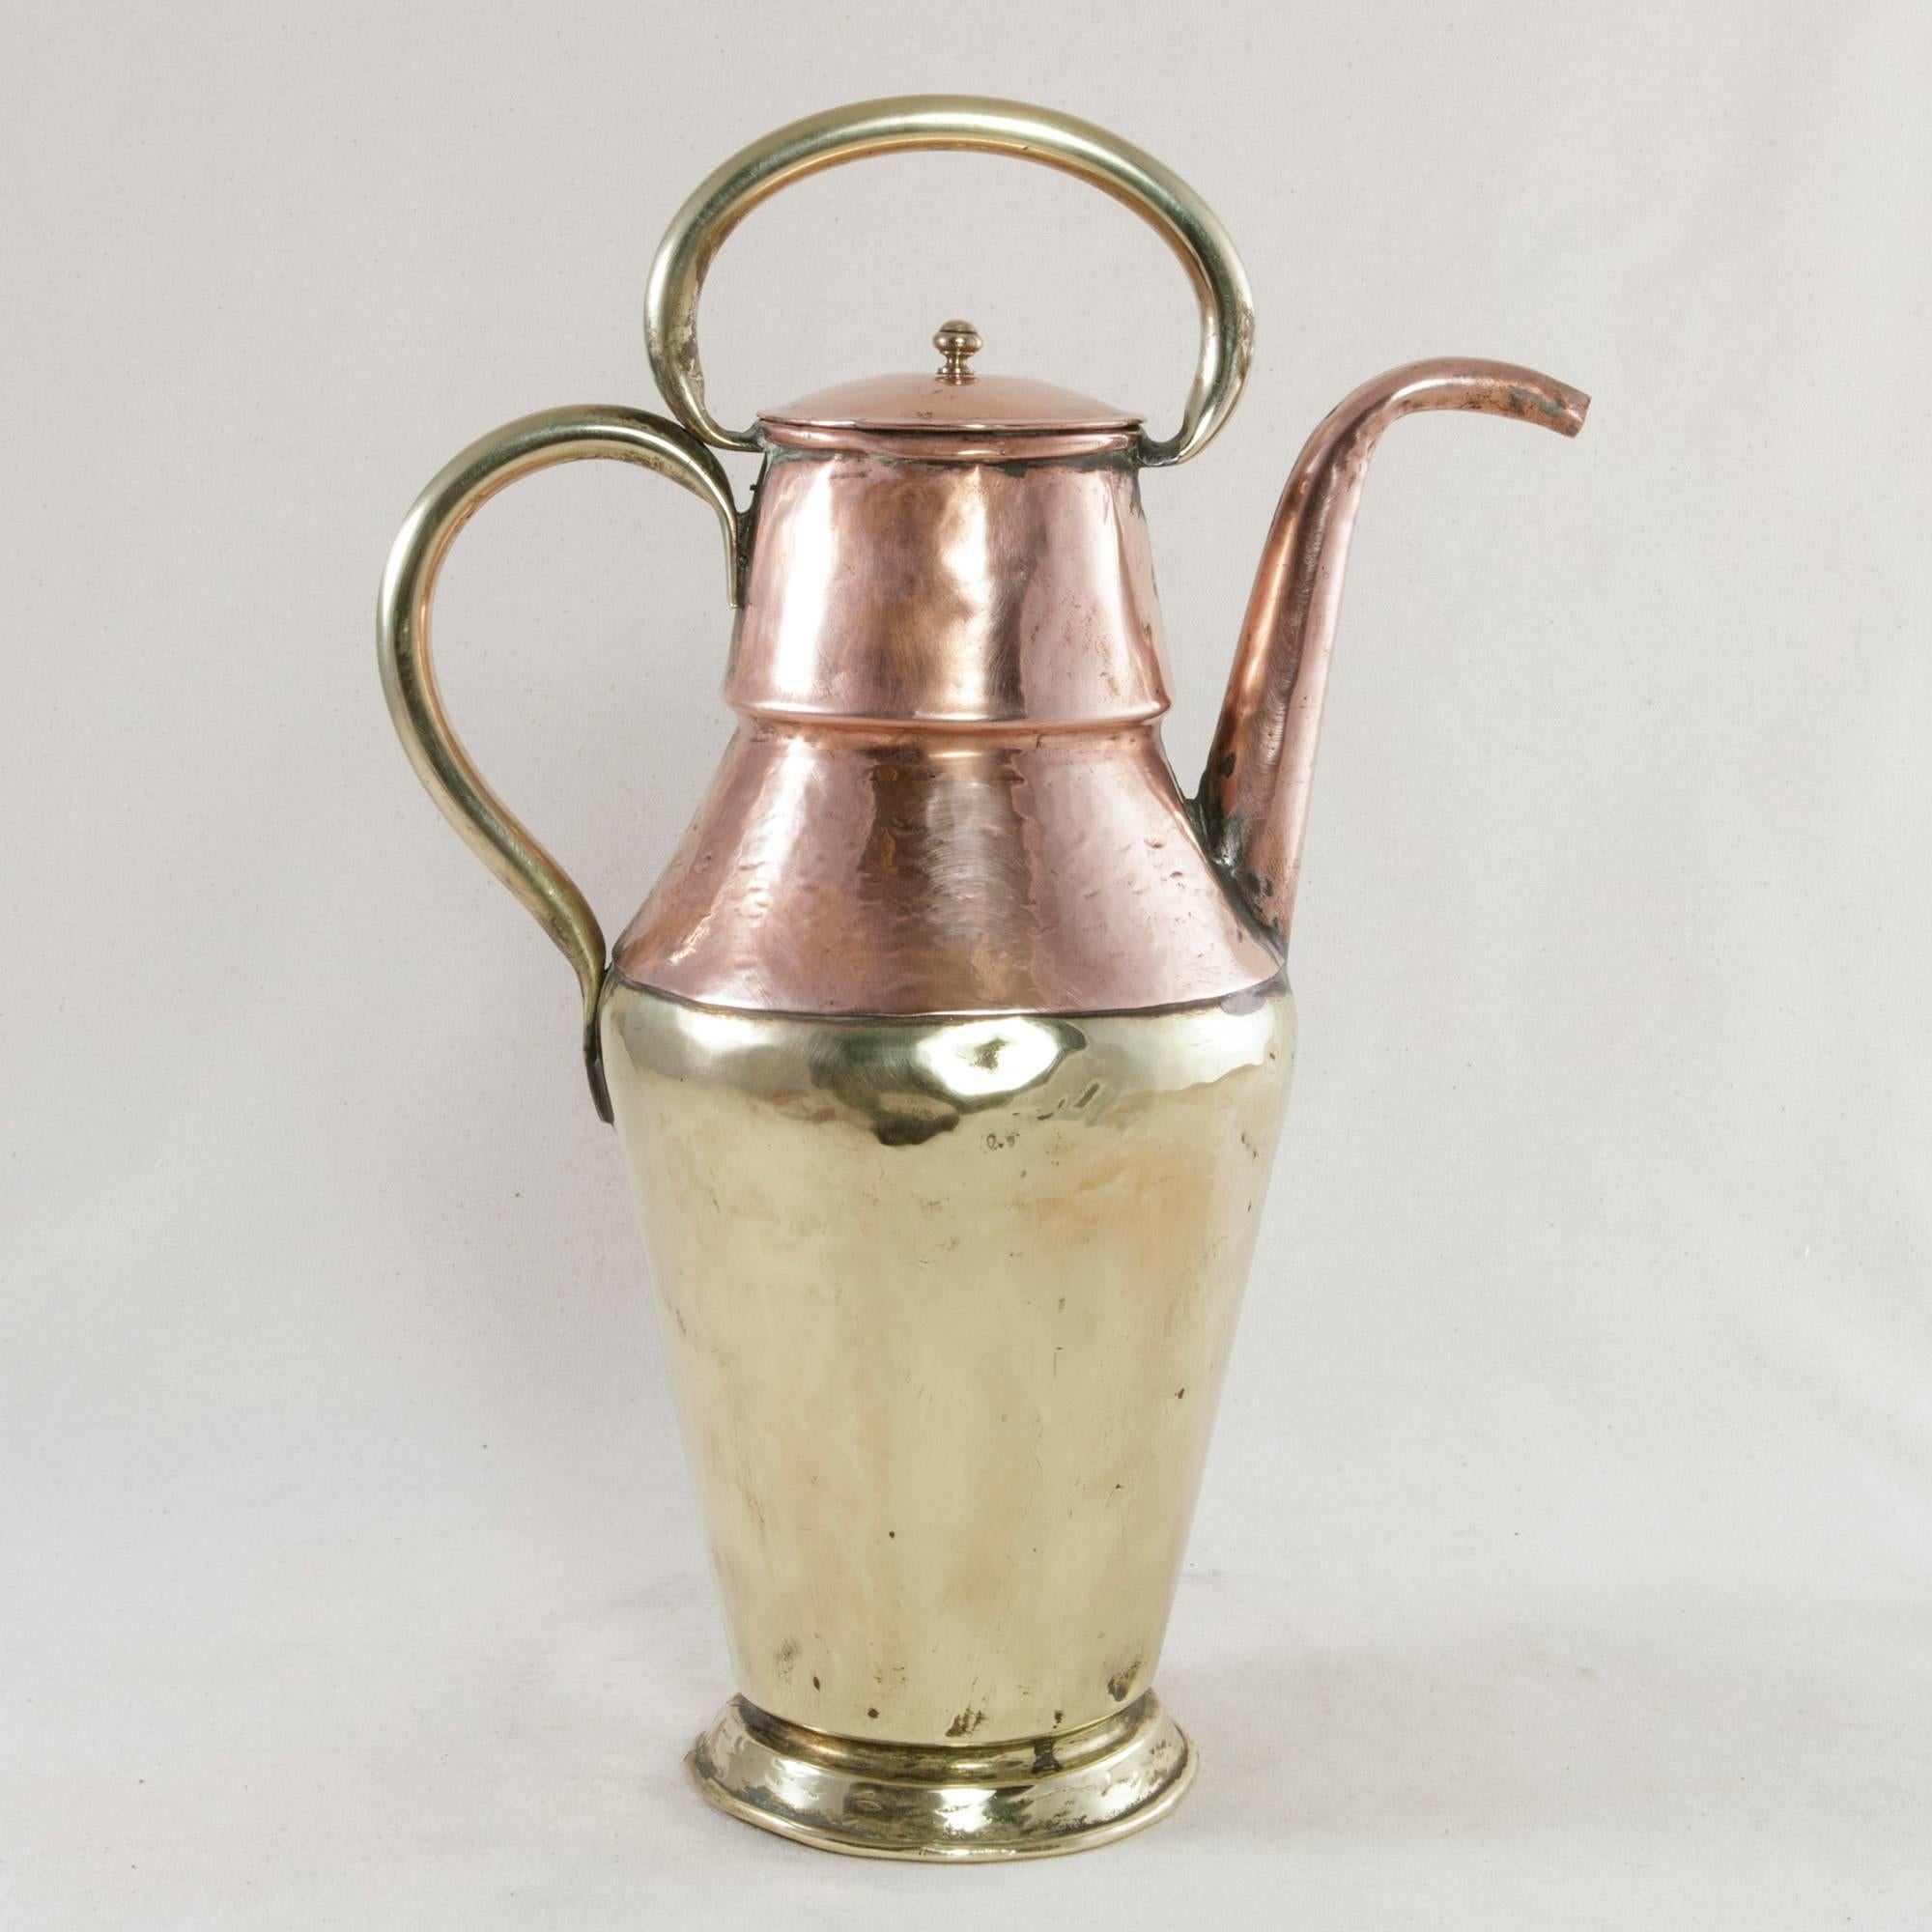 Early 19th Century Hand-Hammered French Copper and Brass Teapot with Lid 1